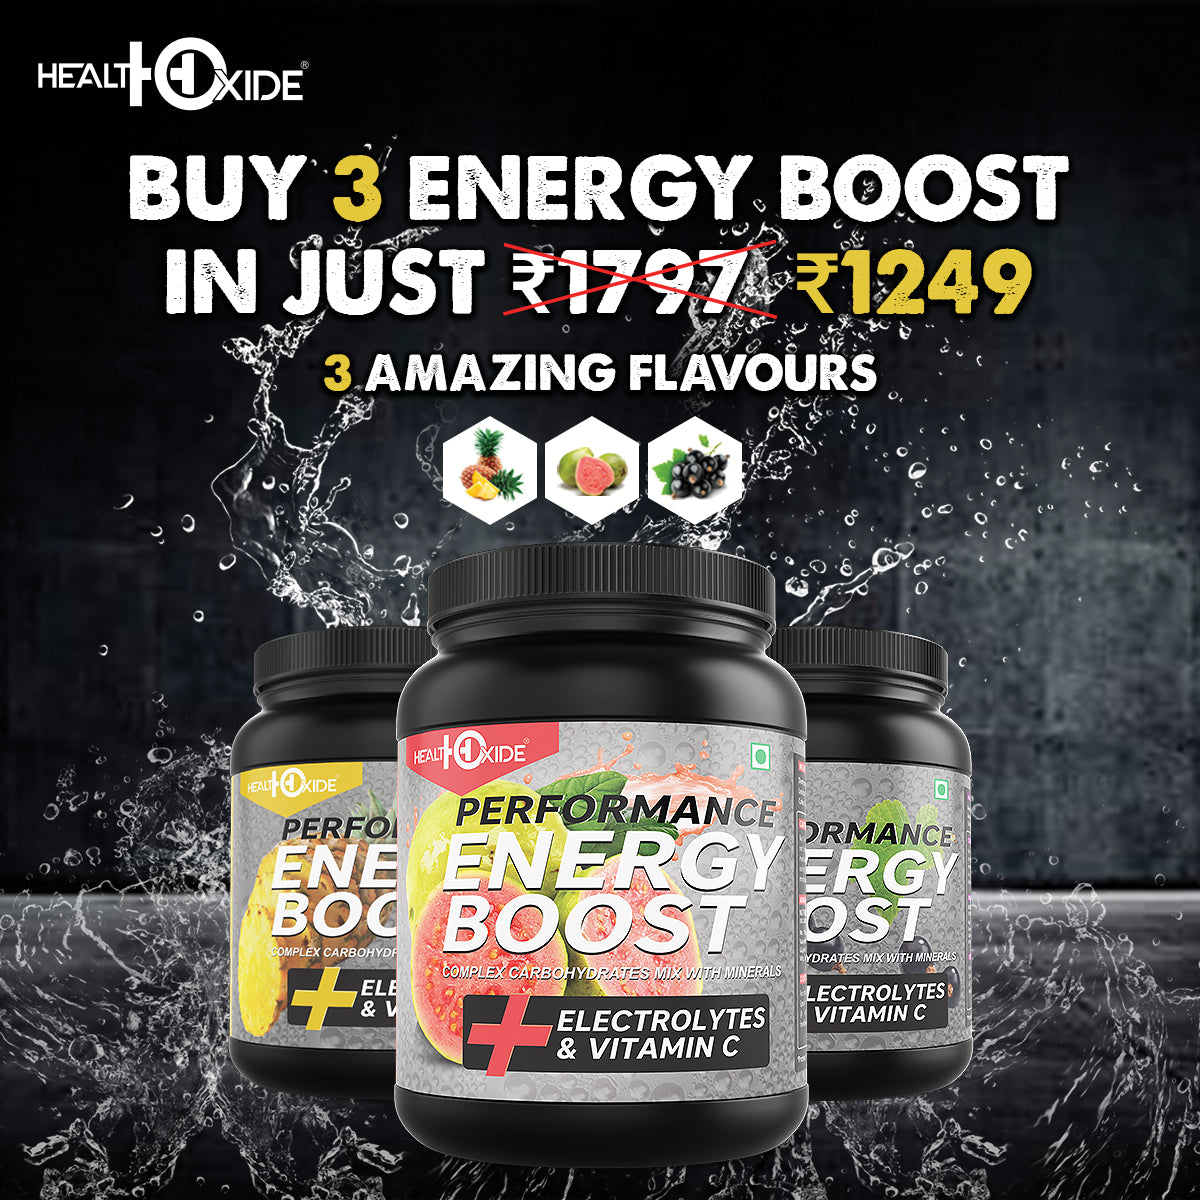 Boost Extra Power Energy Drink - Pack of 3